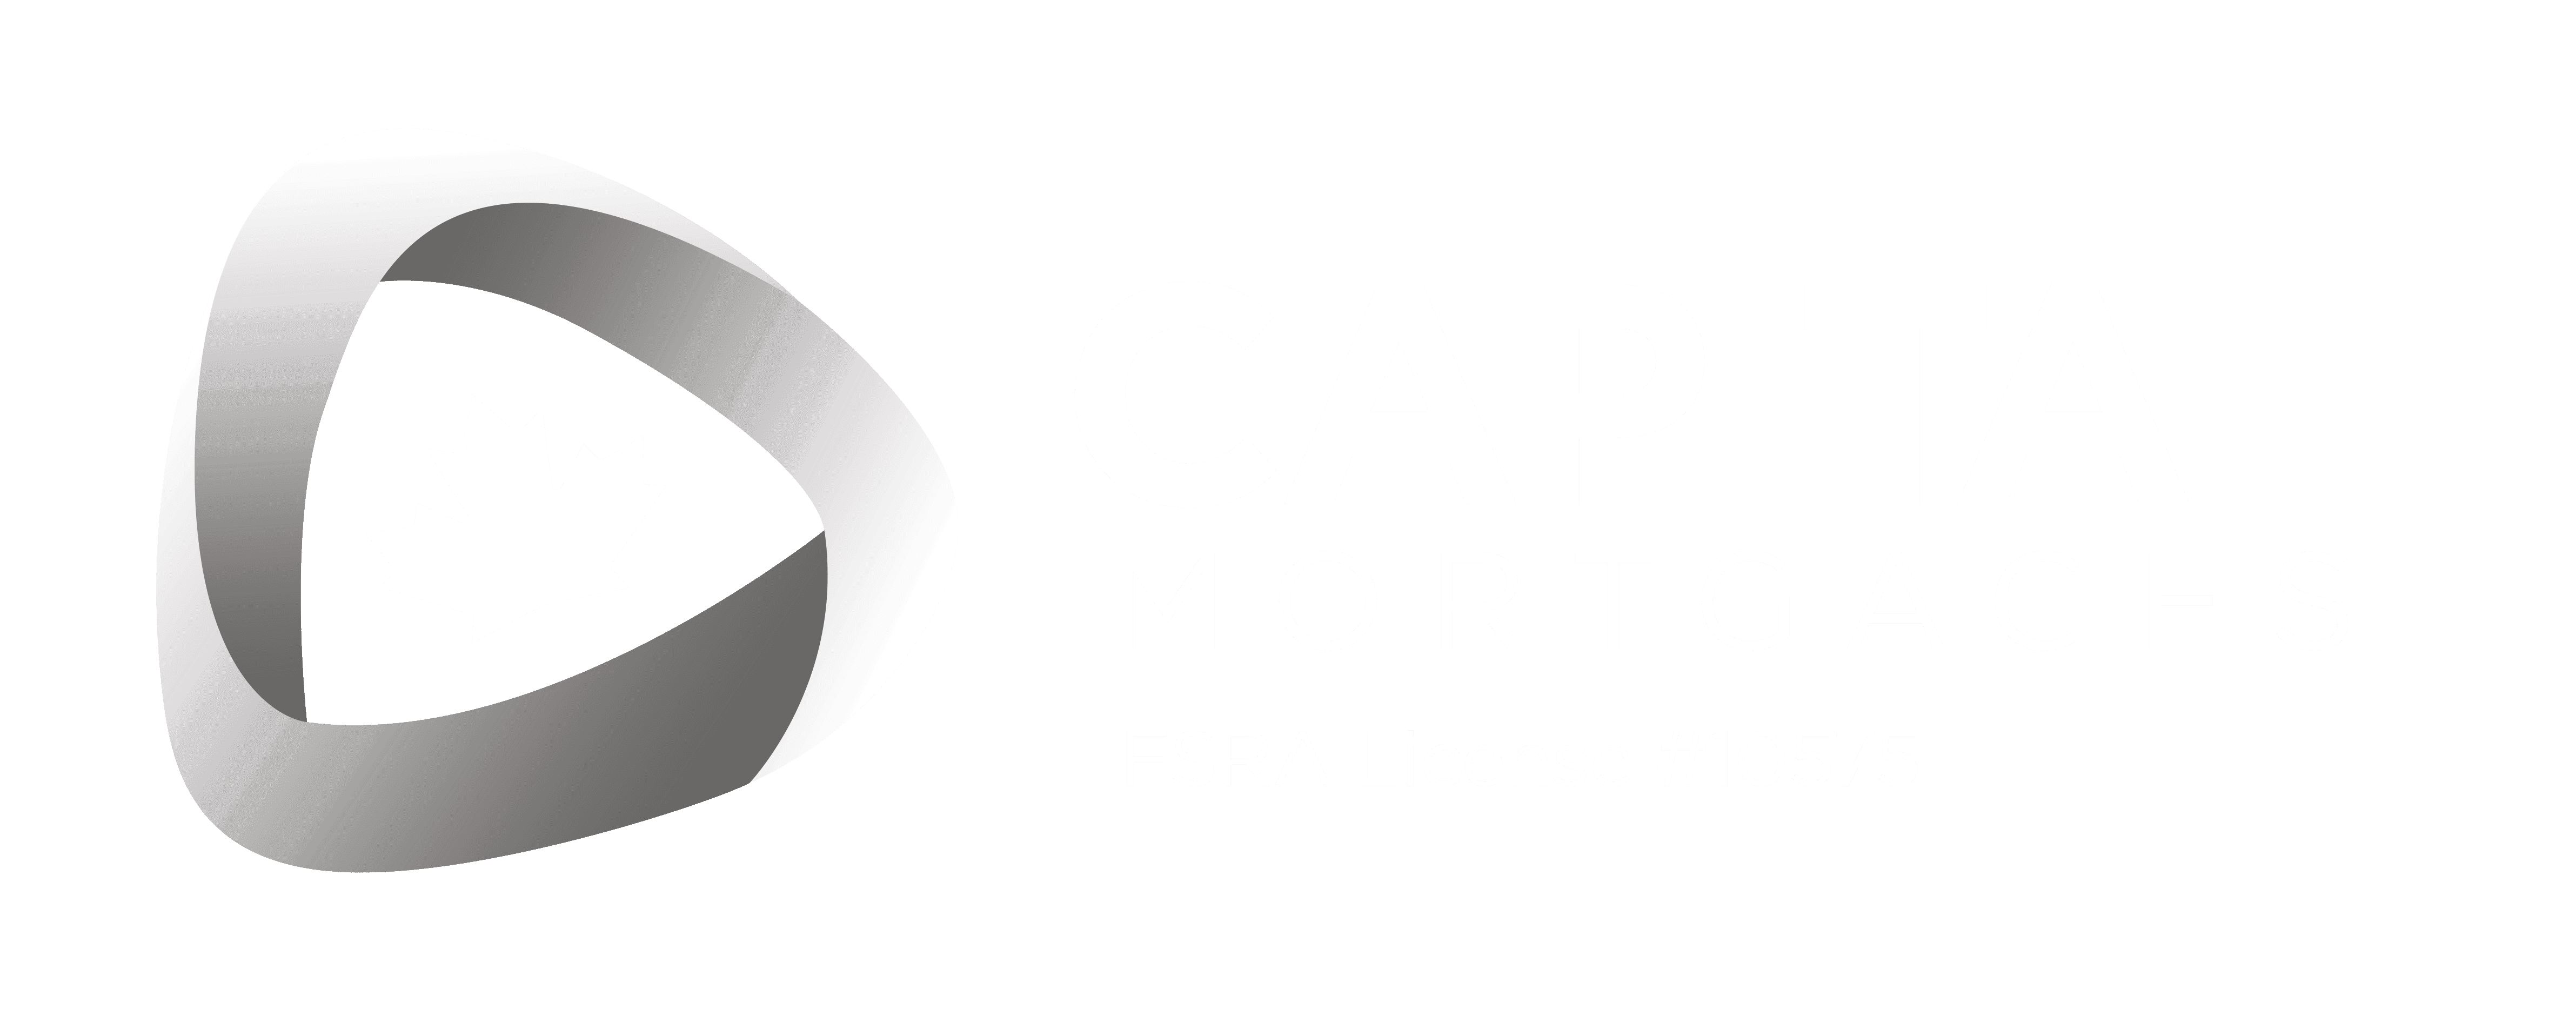 CAPITAL MORTGAGES Logo